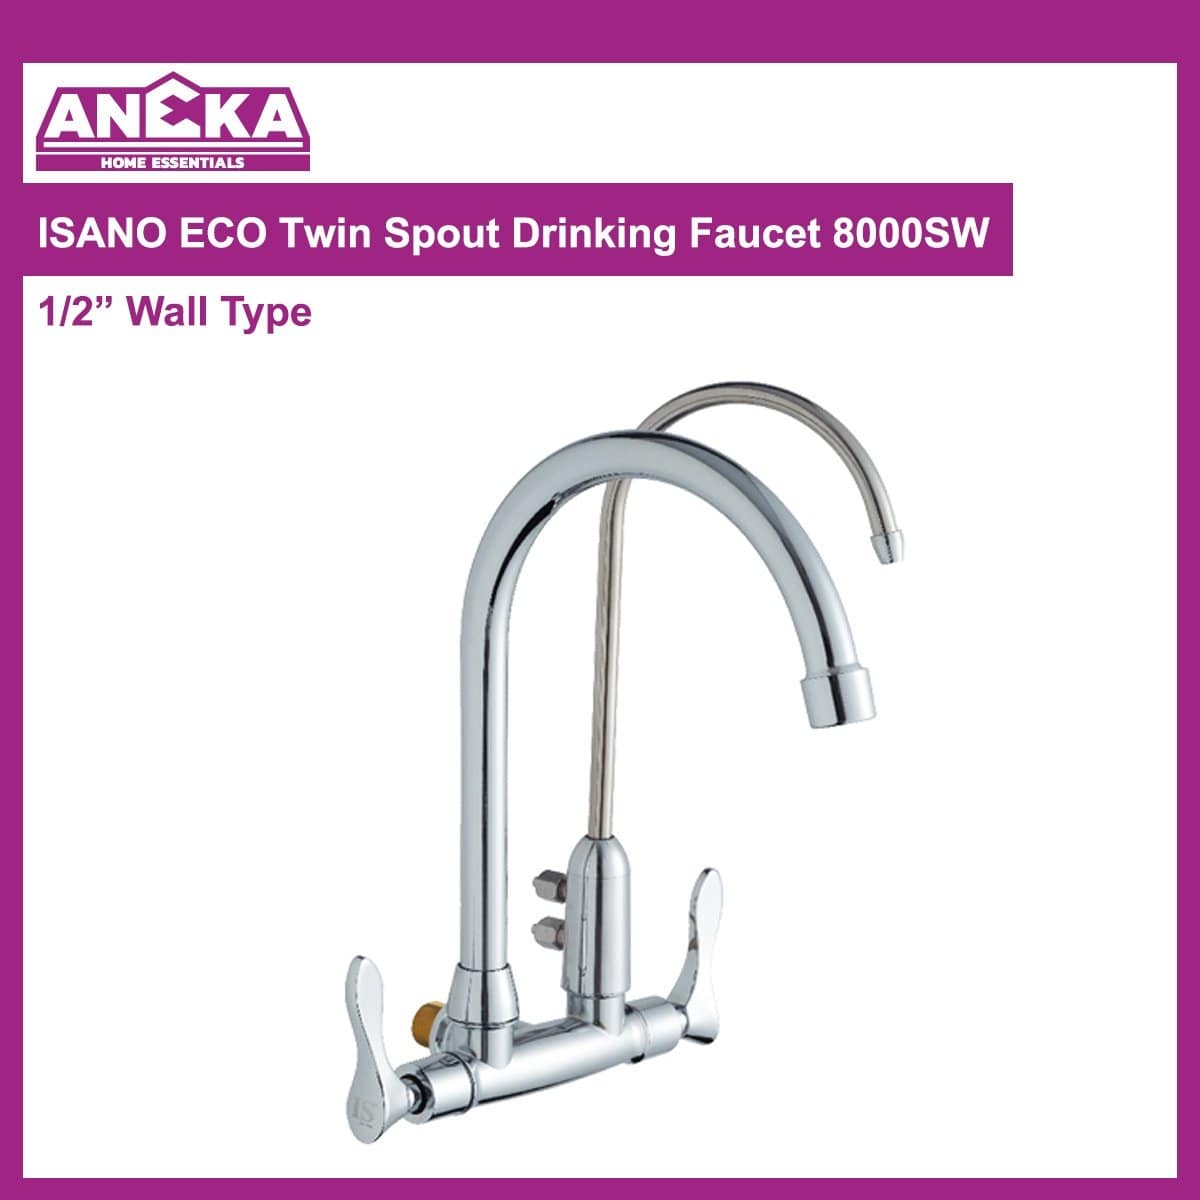 ISANO ECO Twin Spout Drinking Faucet 8000SW